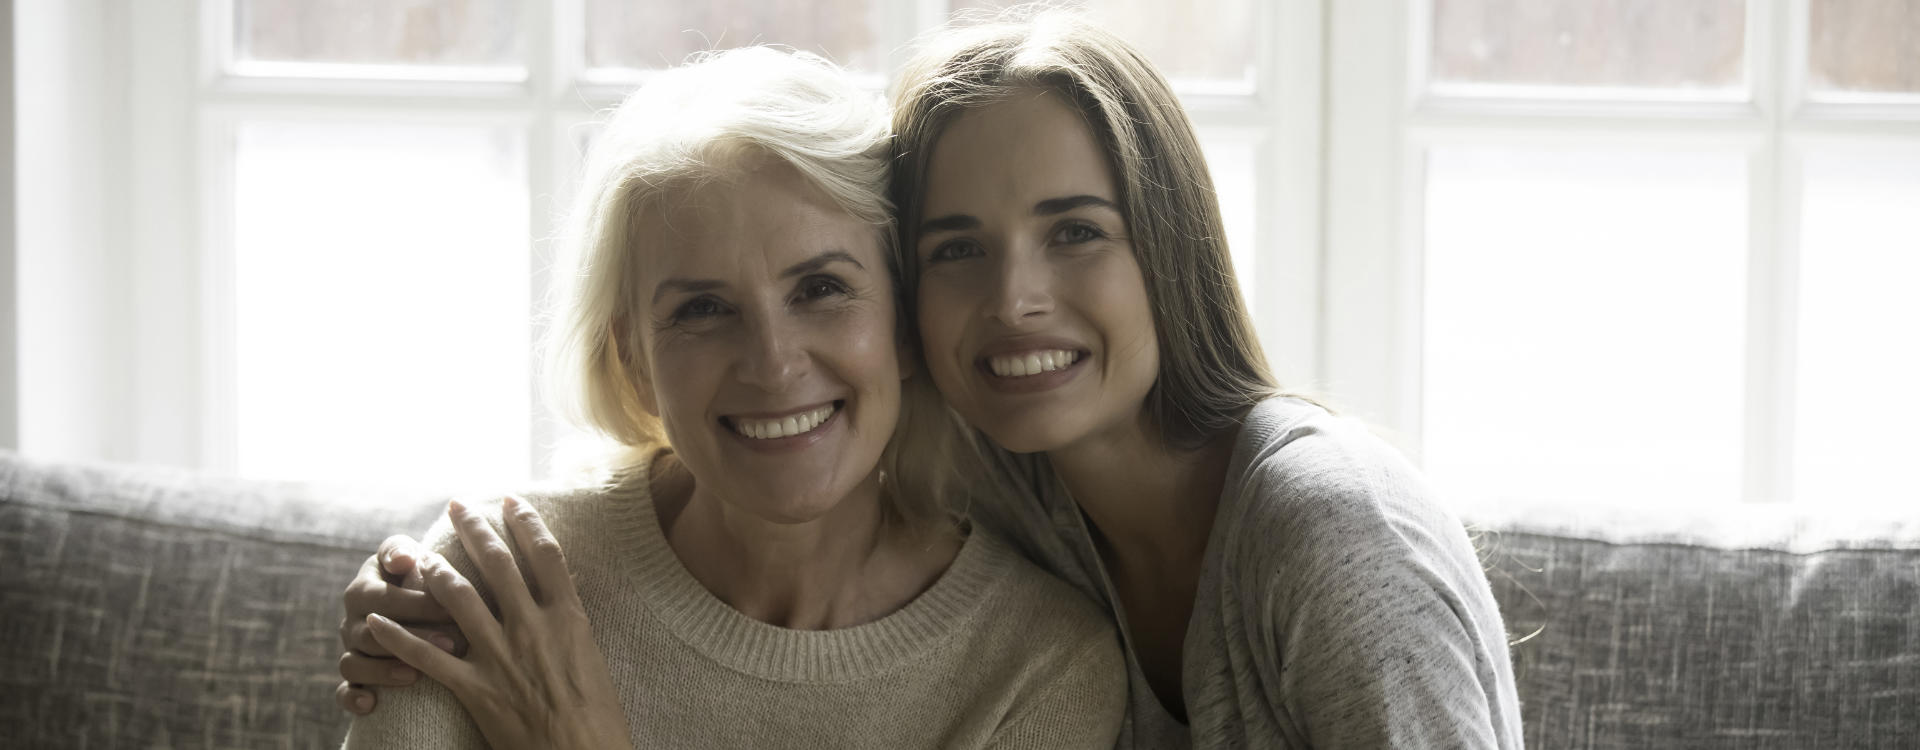 Dental Implants: Your Chance for a Smile Makeover Elk Grove, CA